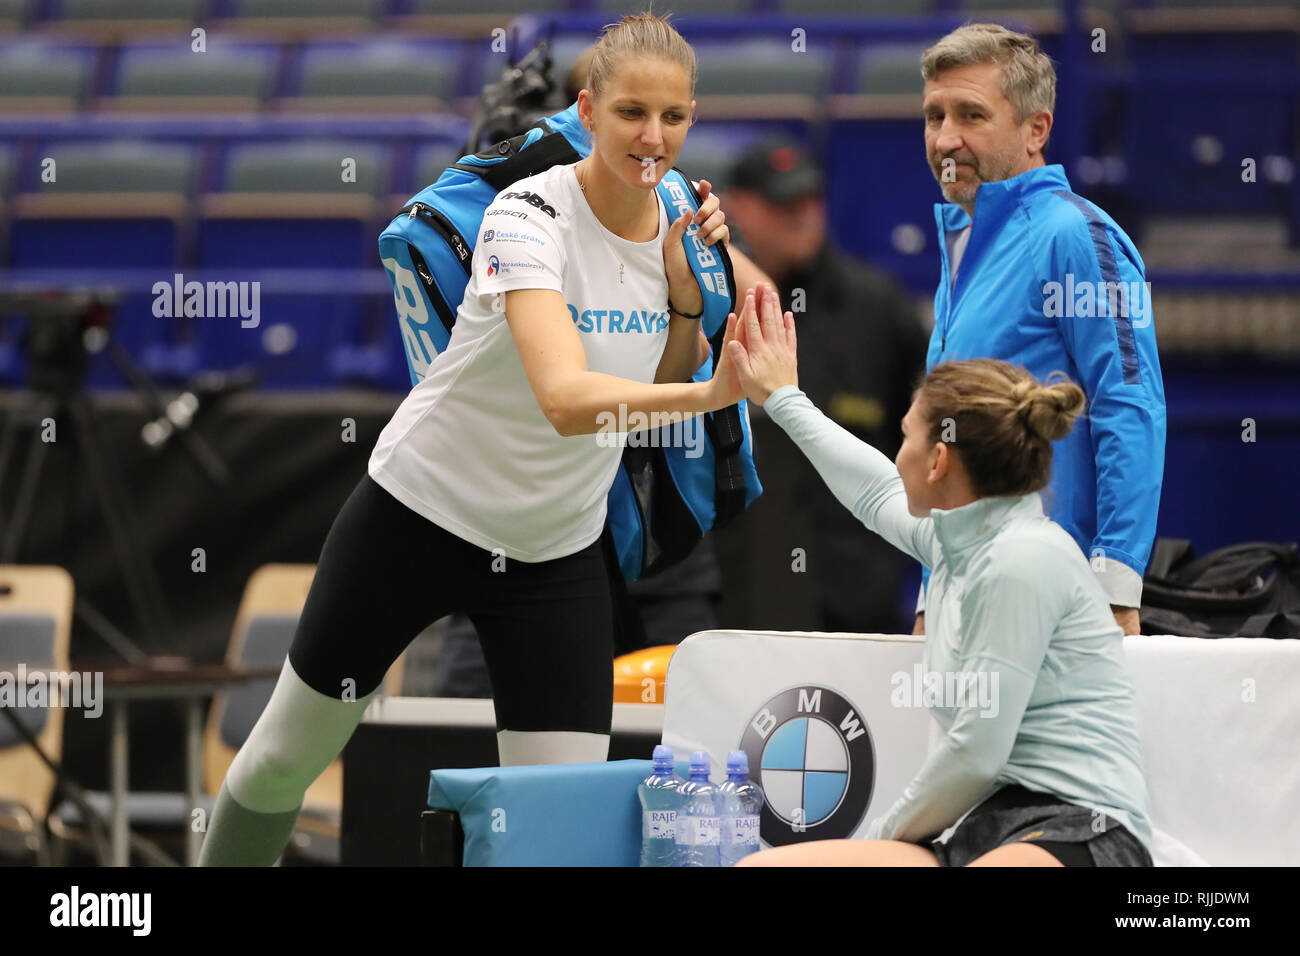 Czech tennis player Karolina Pliskova (left) greets with Romanian tennis player Simona Halep during a training session prior to the Fed Cup, World Gro Stock Photo